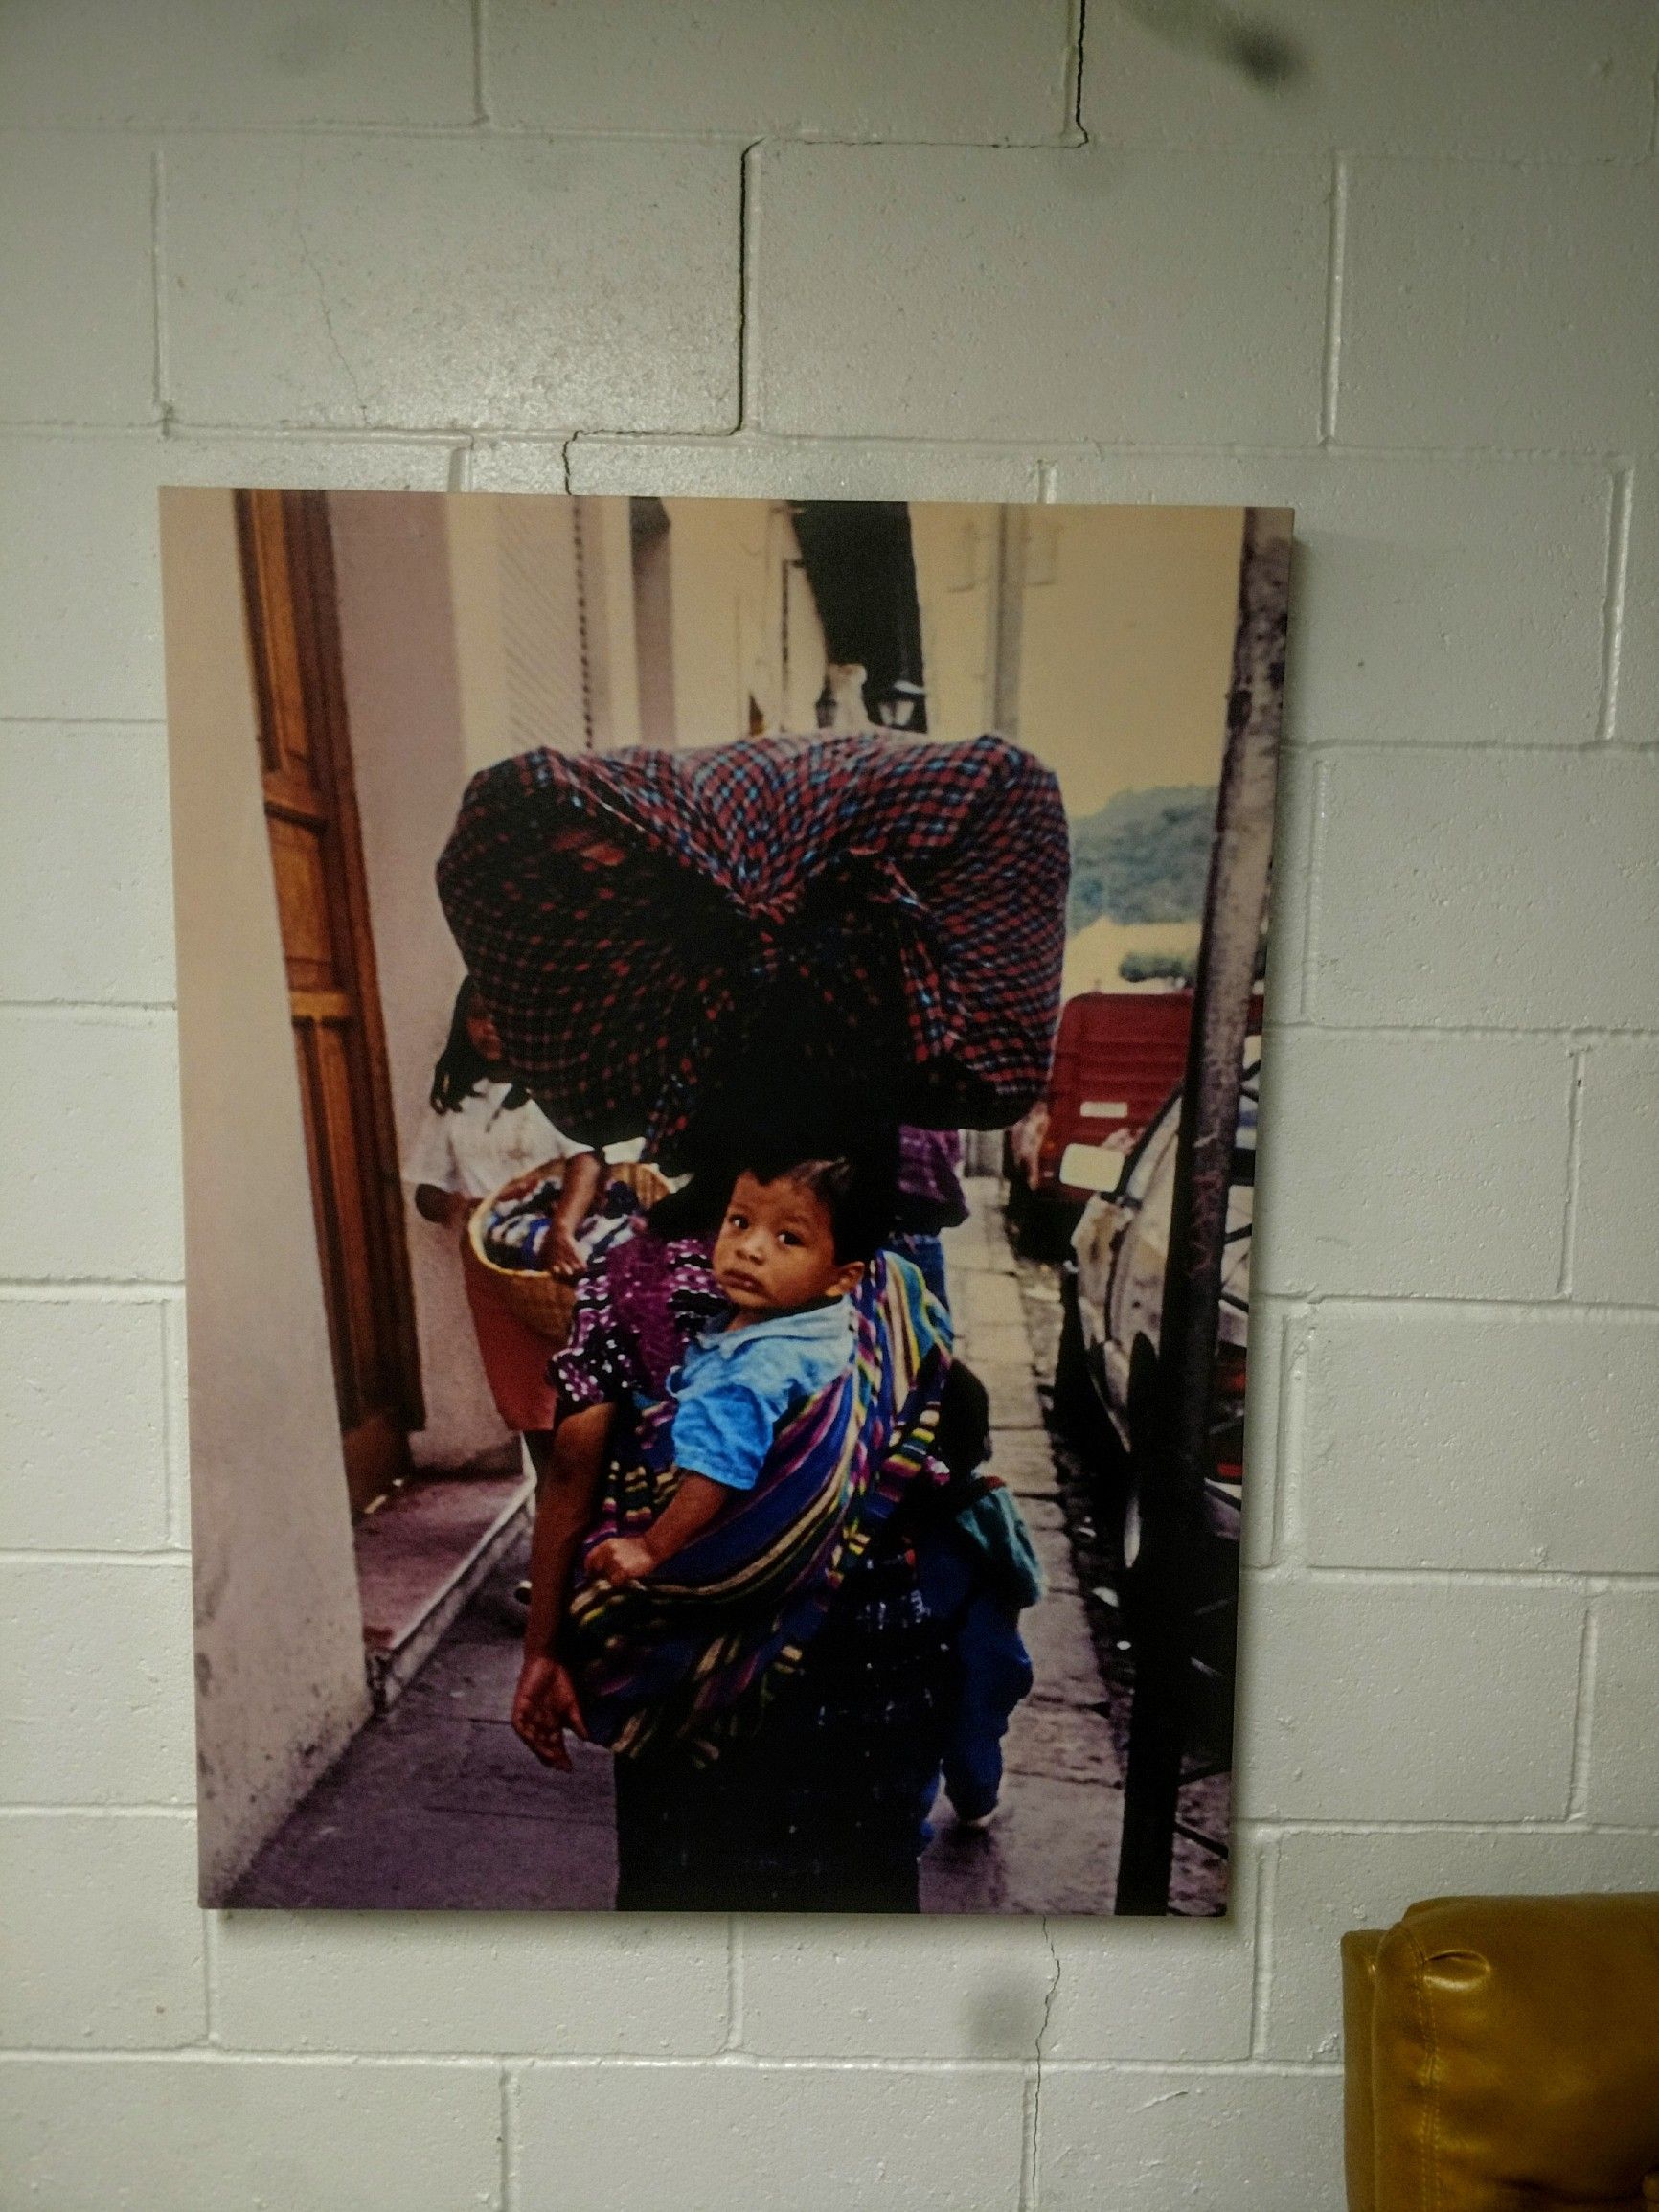 Large 30" x 40" Original Photo On Canvas Wall Art Taken In Guatemala Ready To Hang